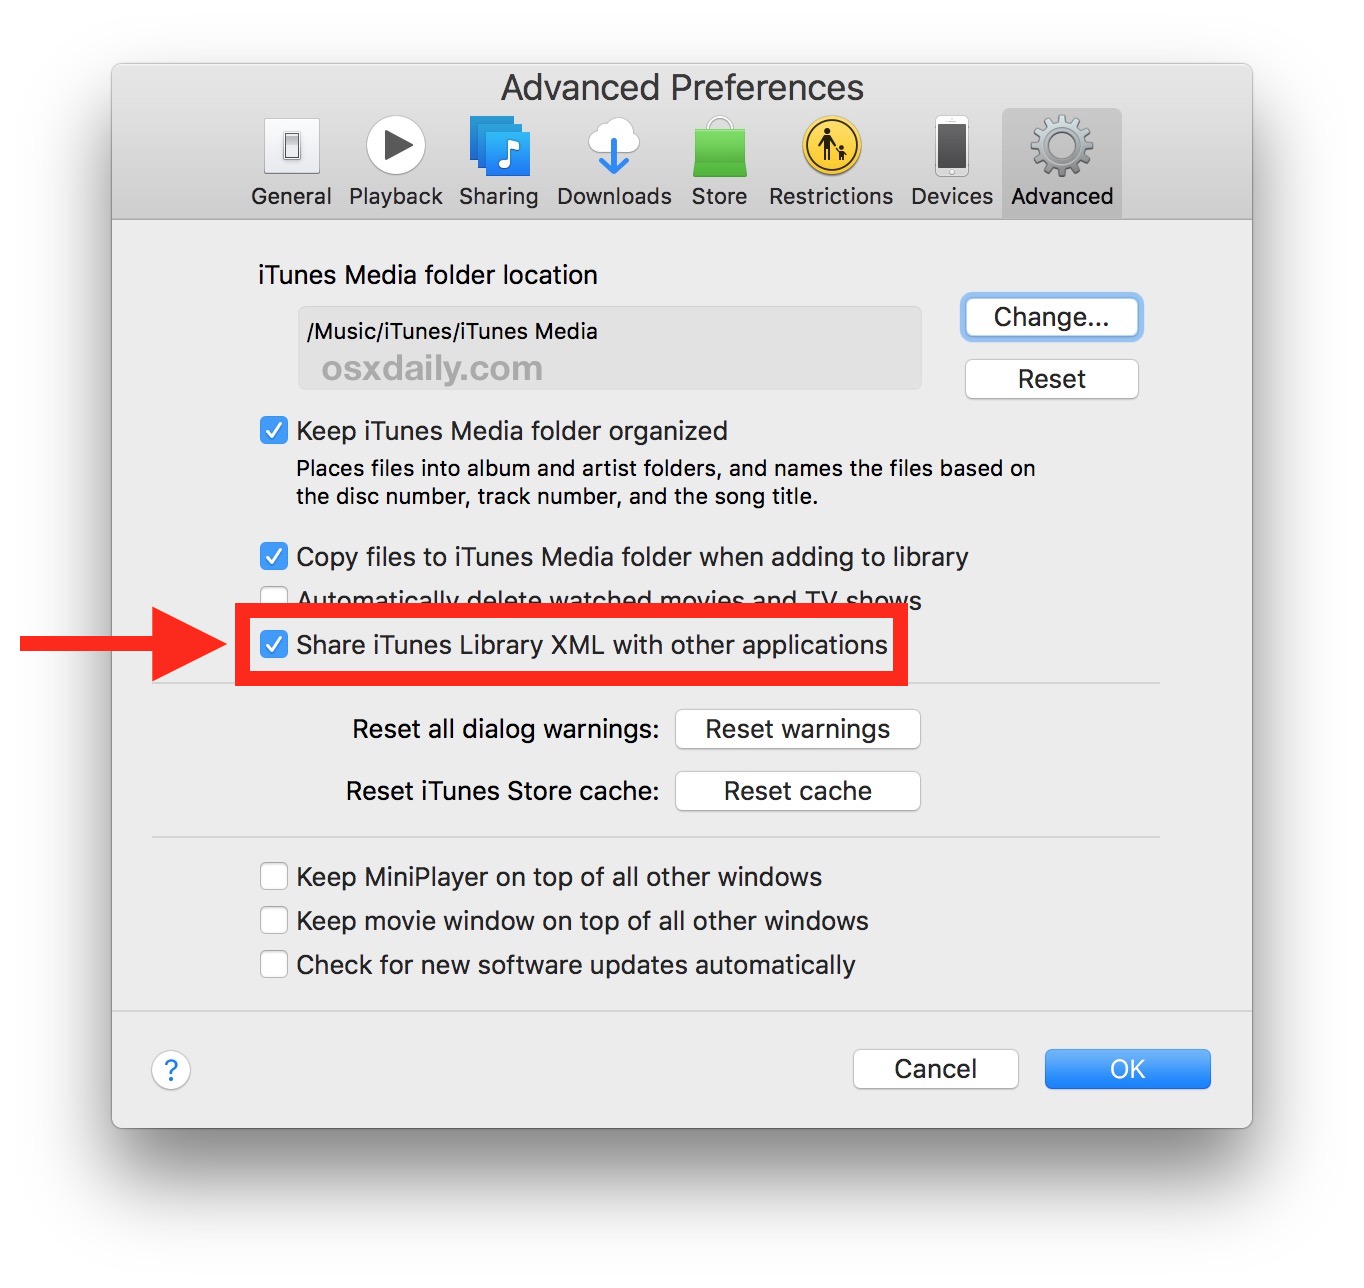 How to set iTunes to create iTunes Library XML file